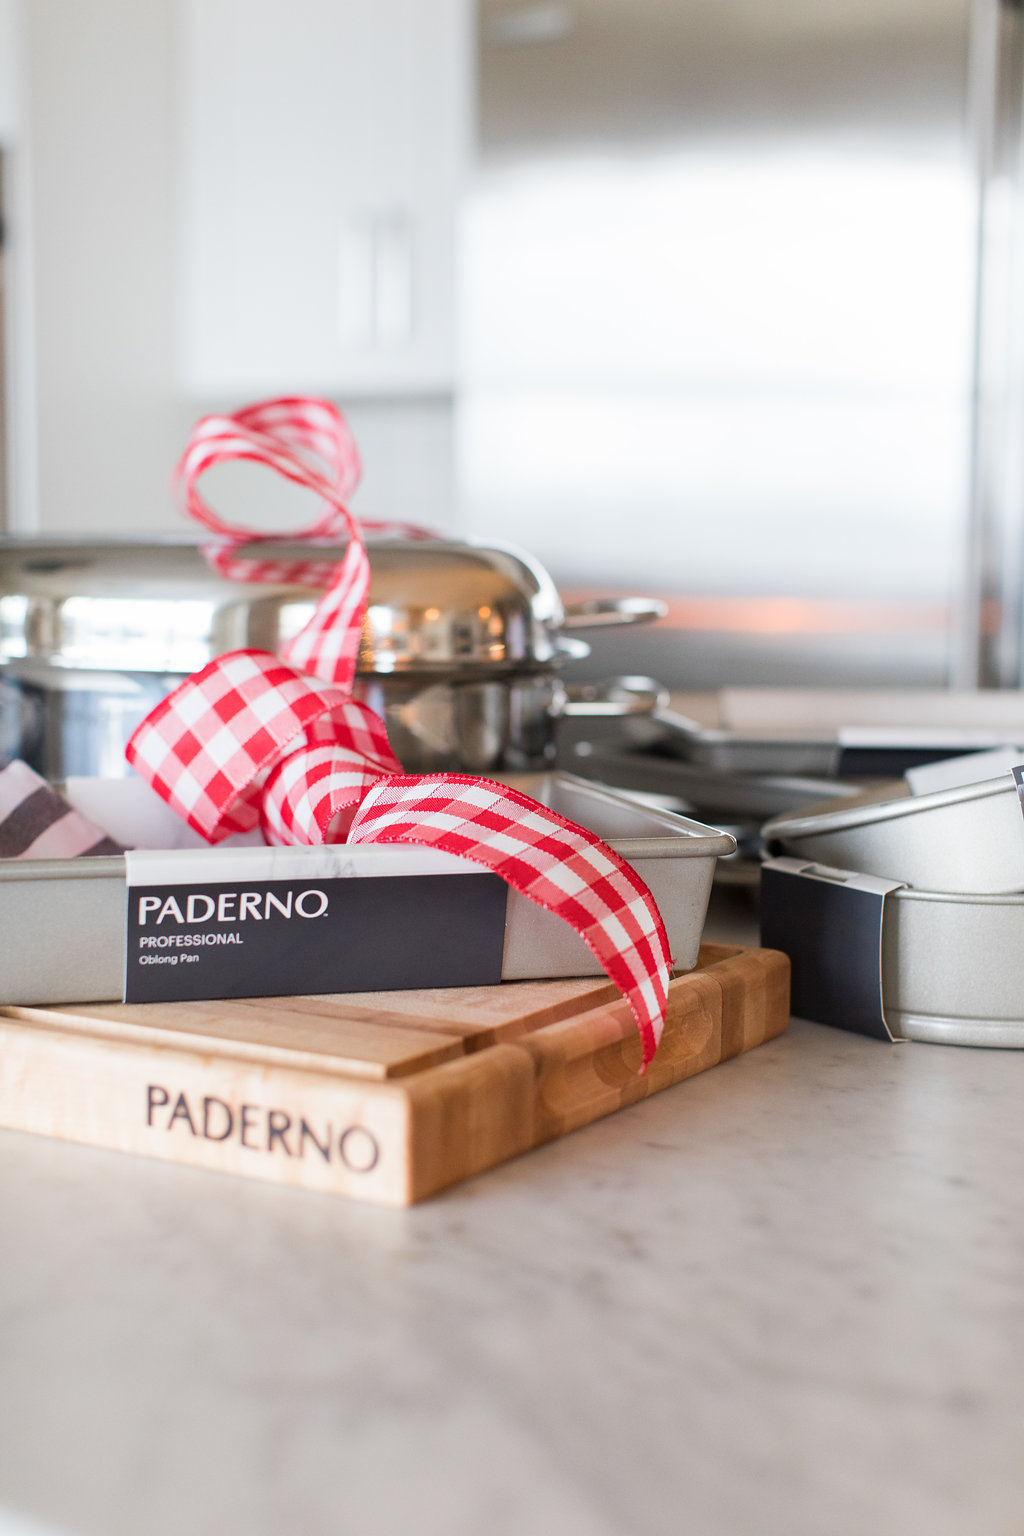 Good bakeware makes the PERFECT gift! Enter to win $600 worth of Paderno Professional bakeware on fraichenutrition.com!